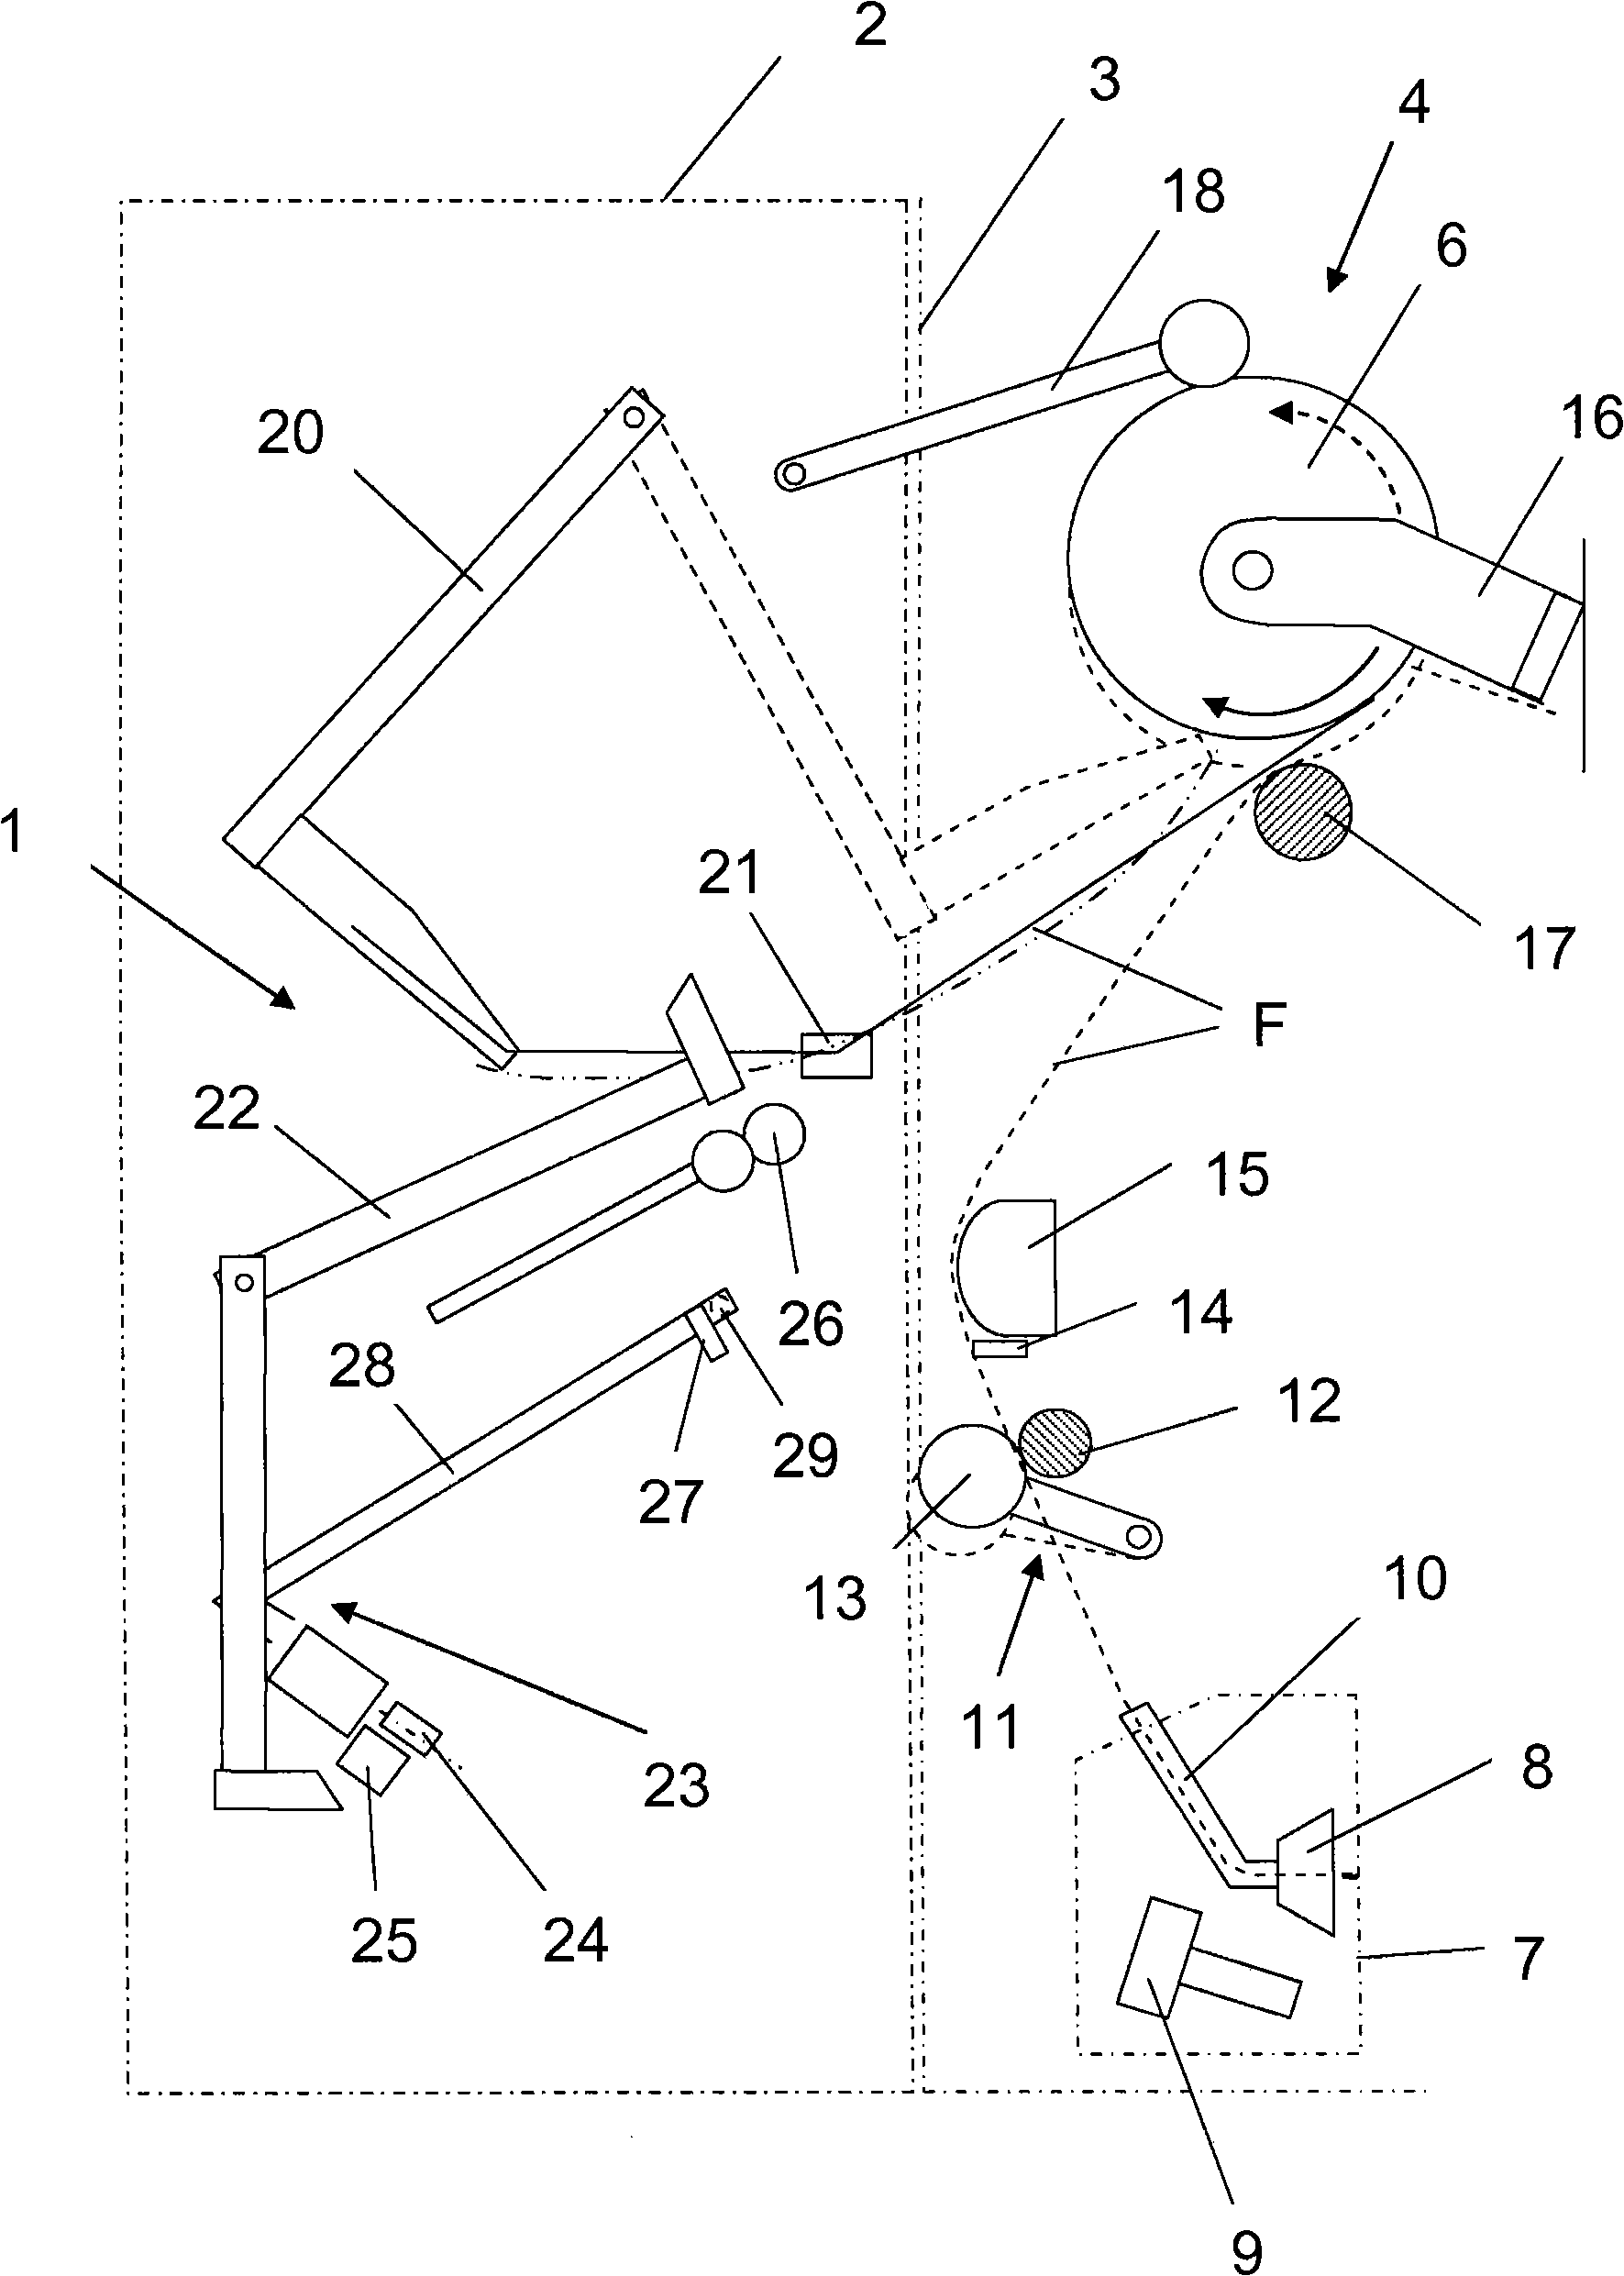 Device for automatic spinning start in an open-end spinning machine